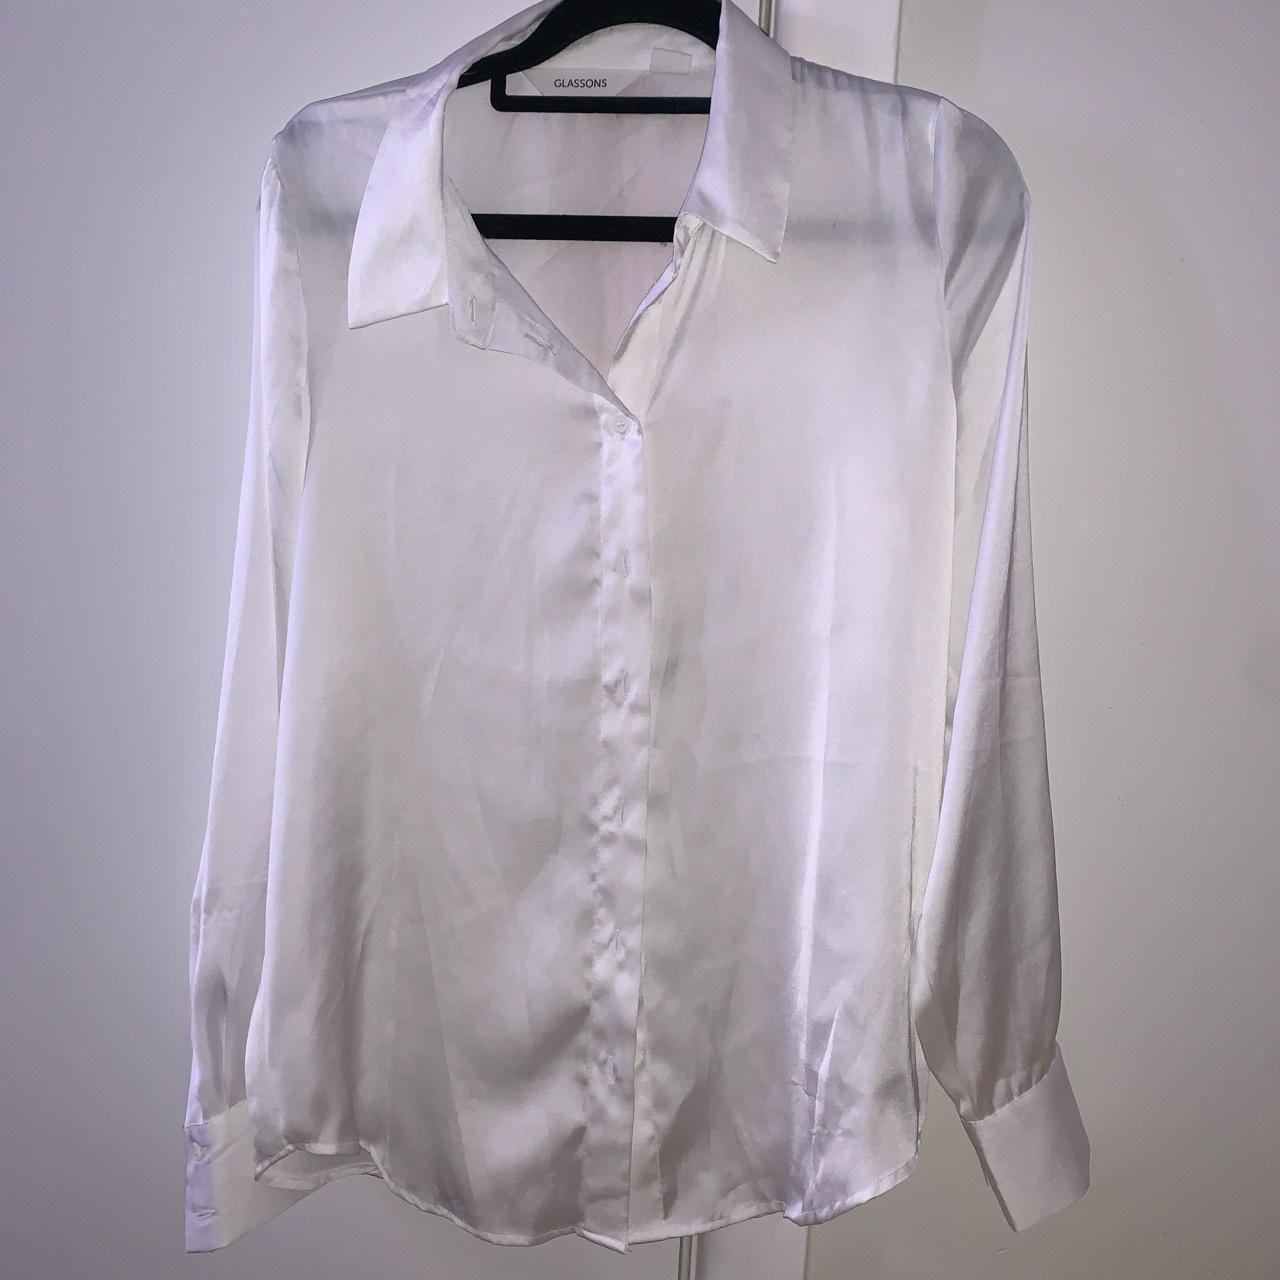 Glassons white satin blouse - size 8 Very cute and... - Depop